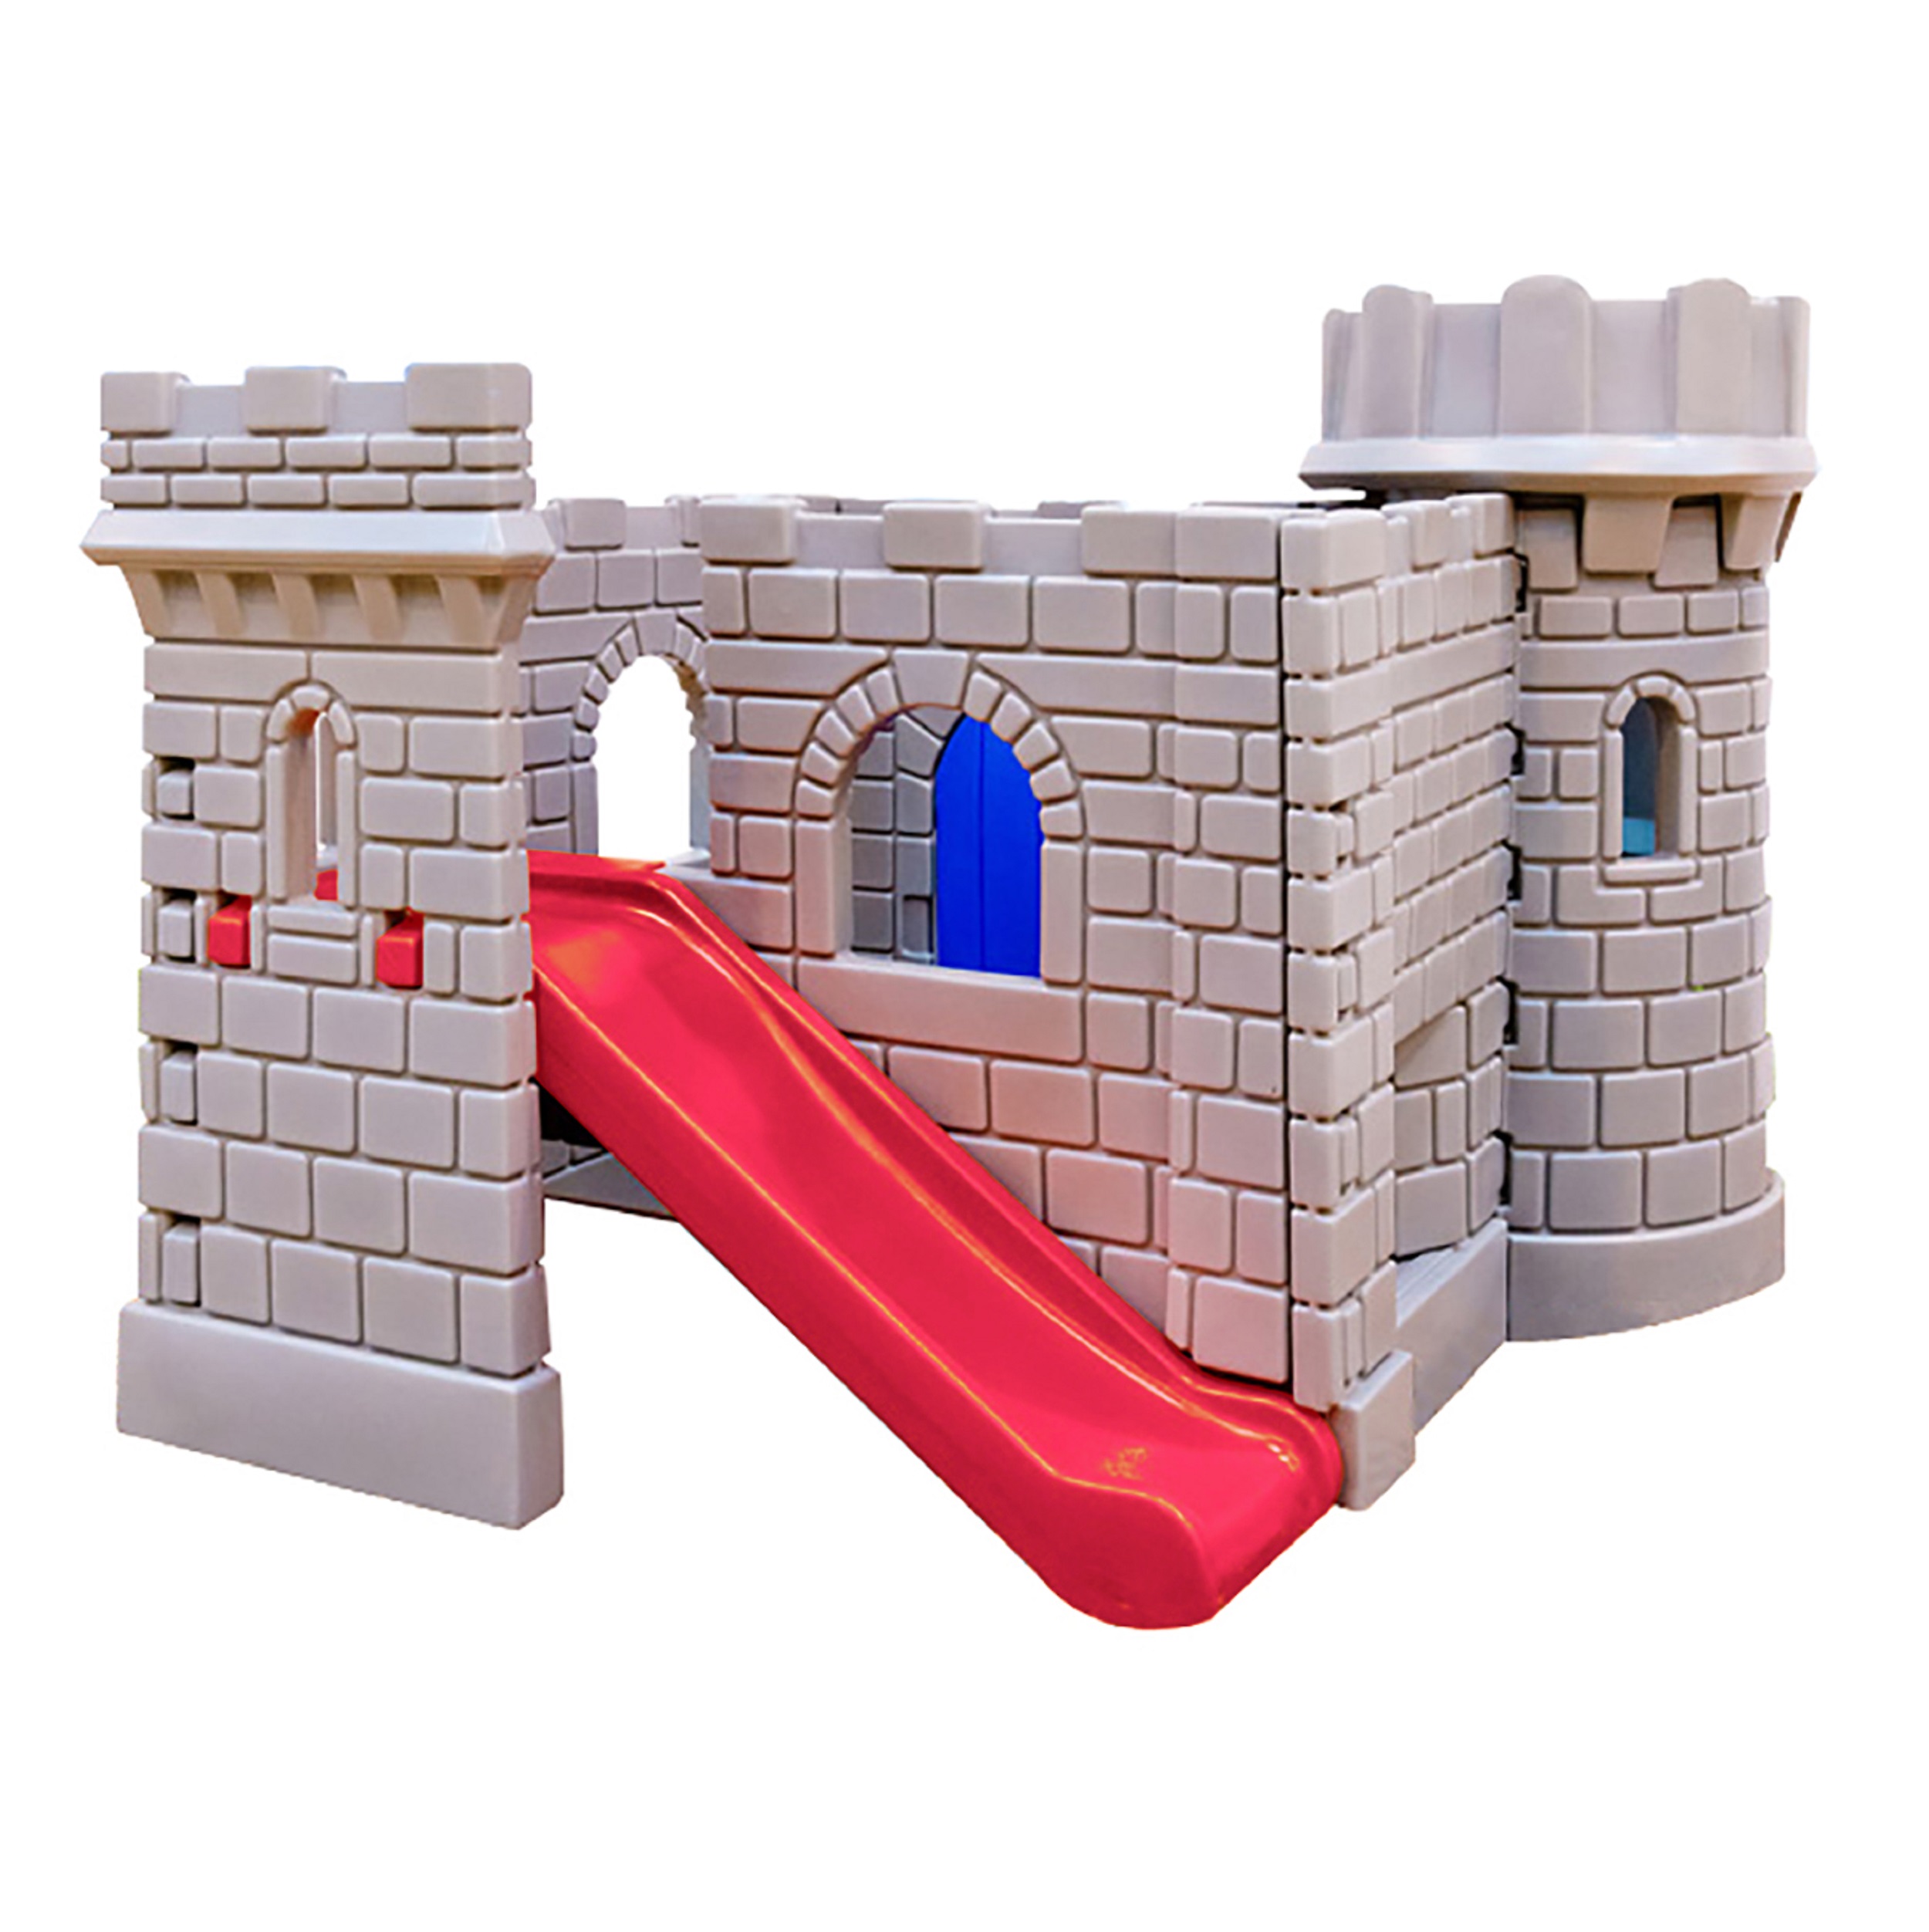 Little Tikes Classic Castle Jungle Gym Playhouse - image 1 of 6